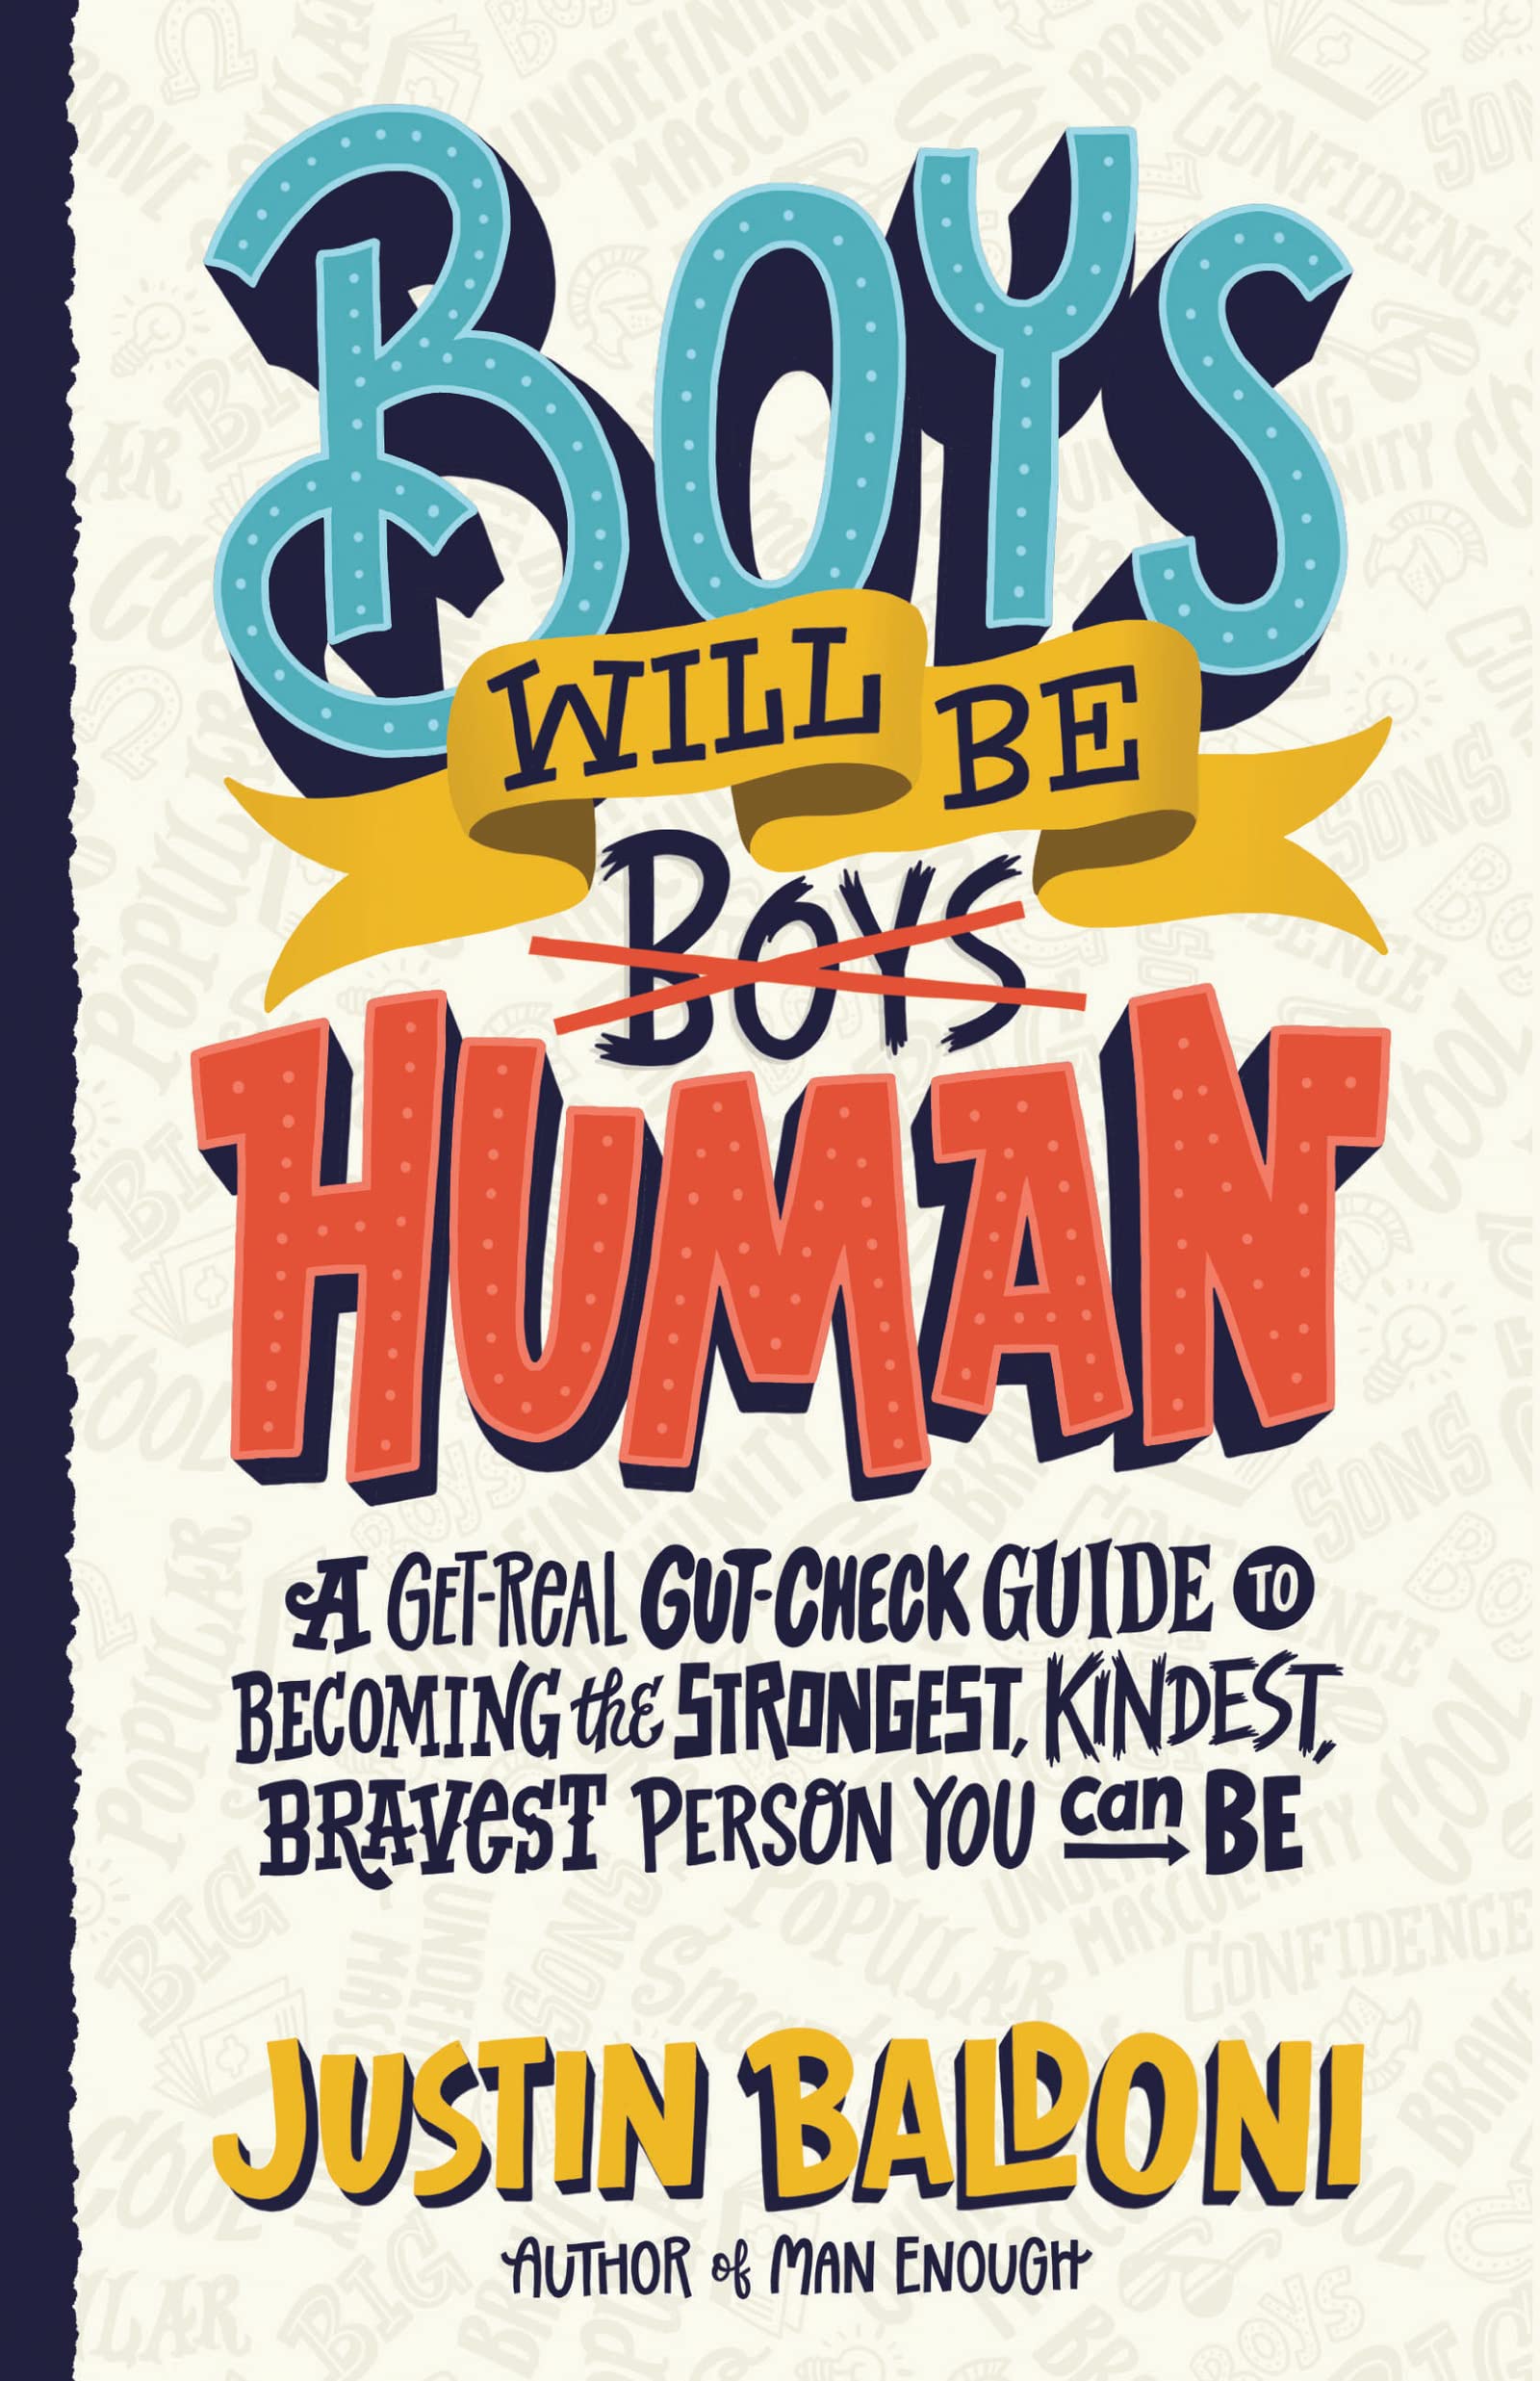 Boys Will Be Human: A Get-Real Gut-Check Guide to Becoming the Strongest, Kindest, Bravest Person You Can Be